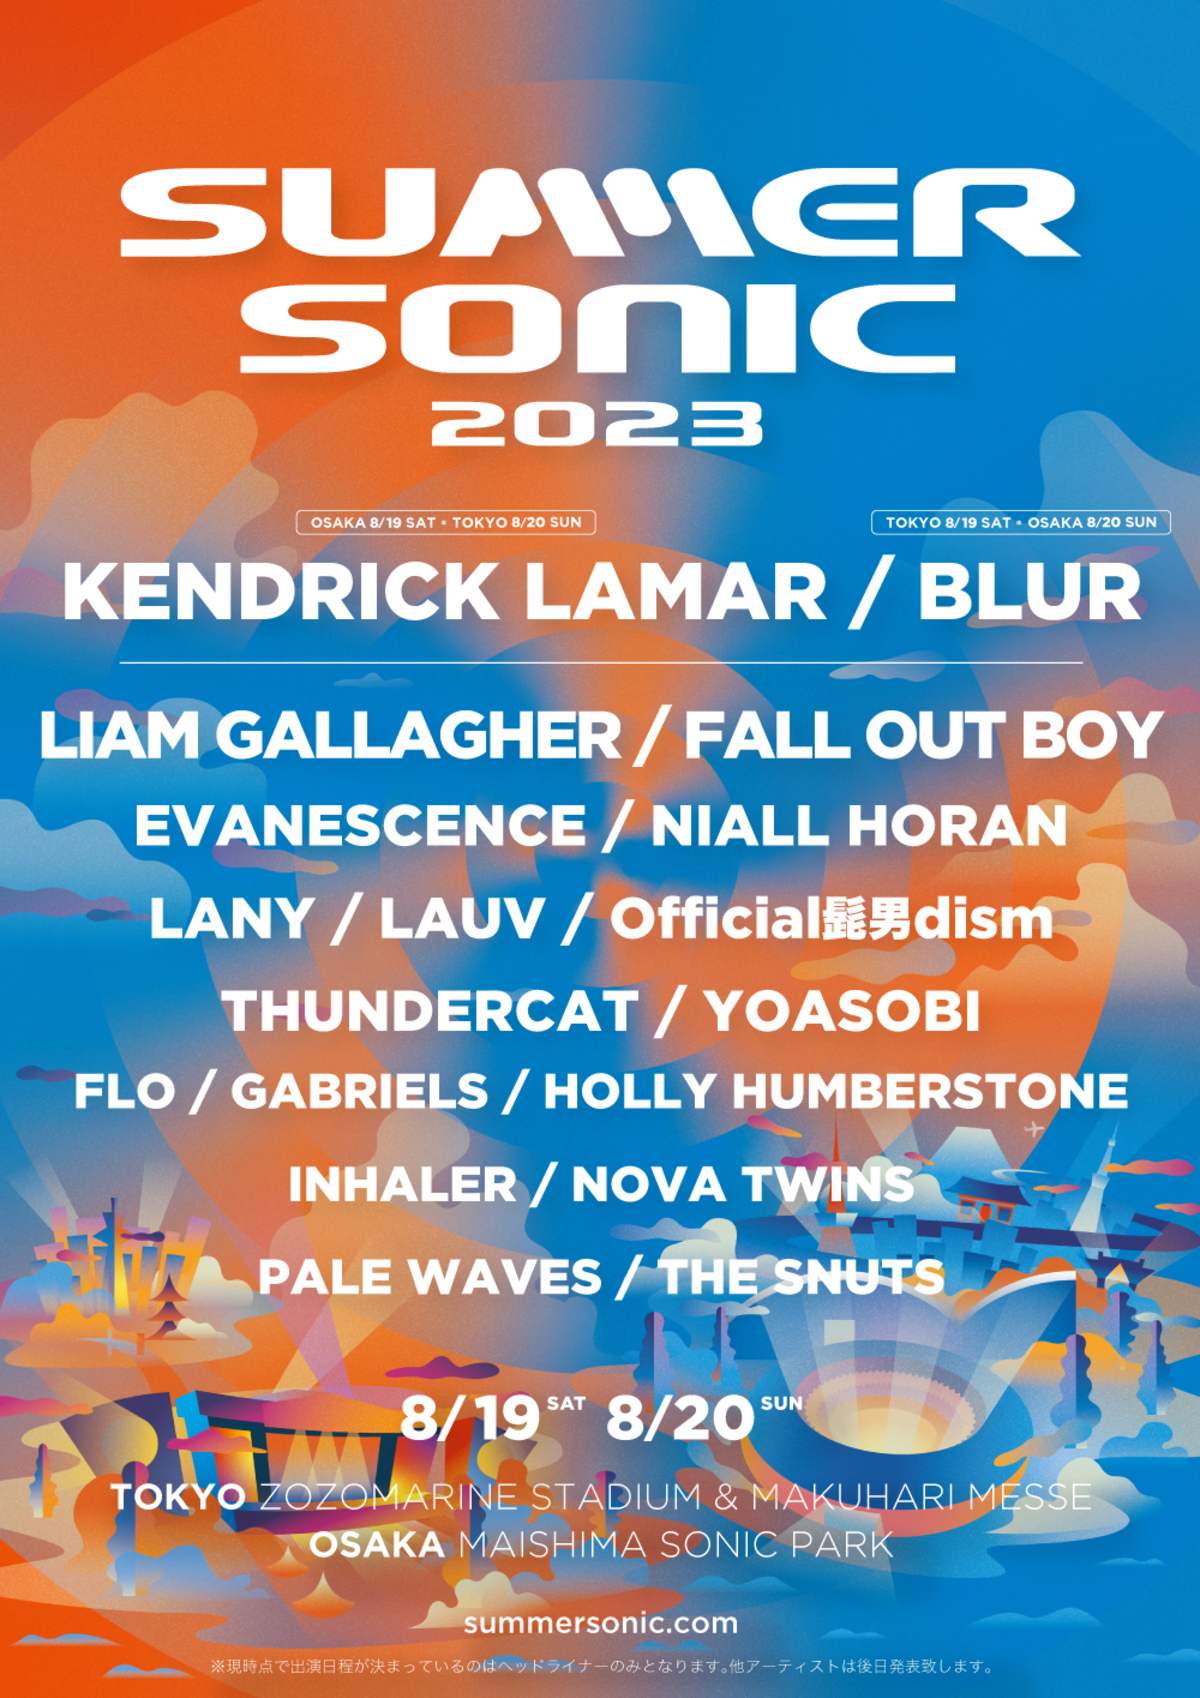 "SUMMER SONIC 2023"、第1弾アーティストでFALL OUT BOY、Liam Gallagher、EVANESCENCE